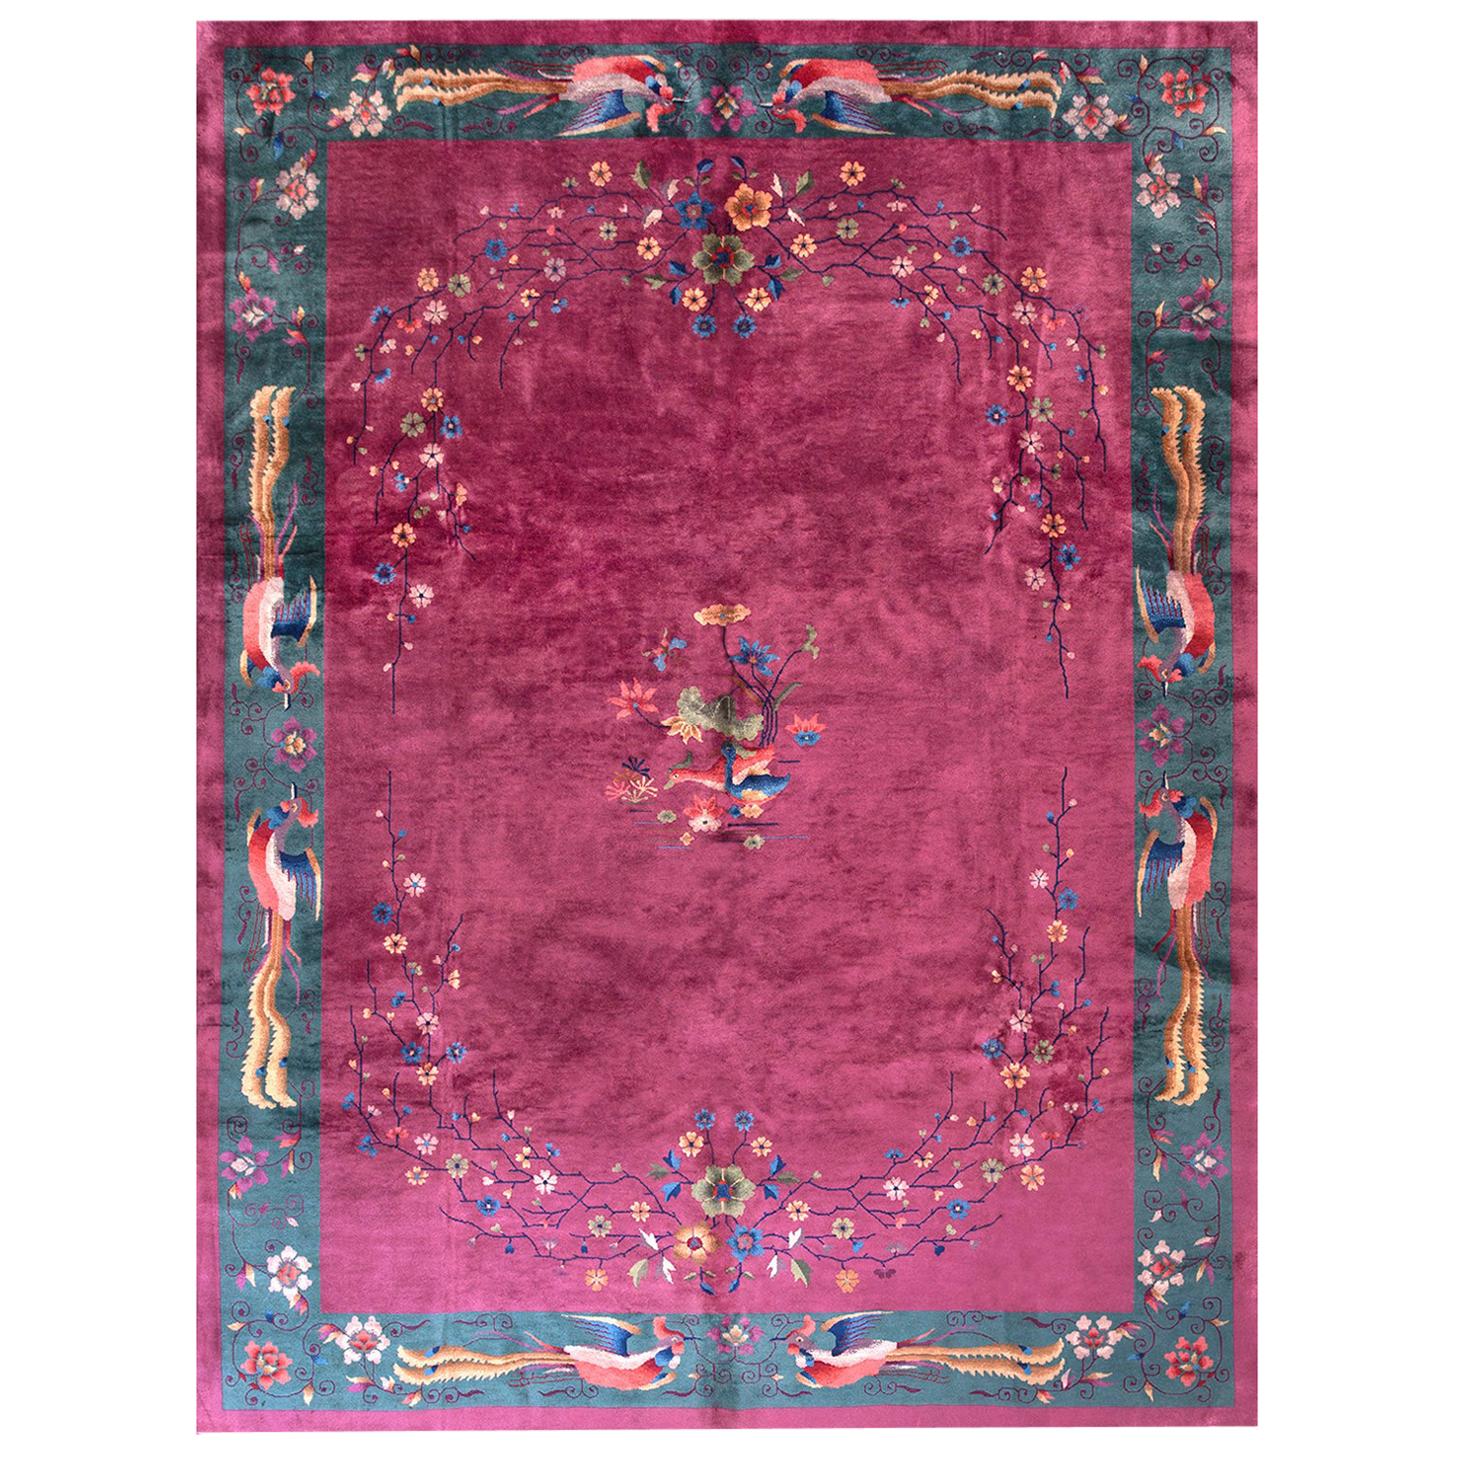 Antique Chinese Art Deco Rugs 